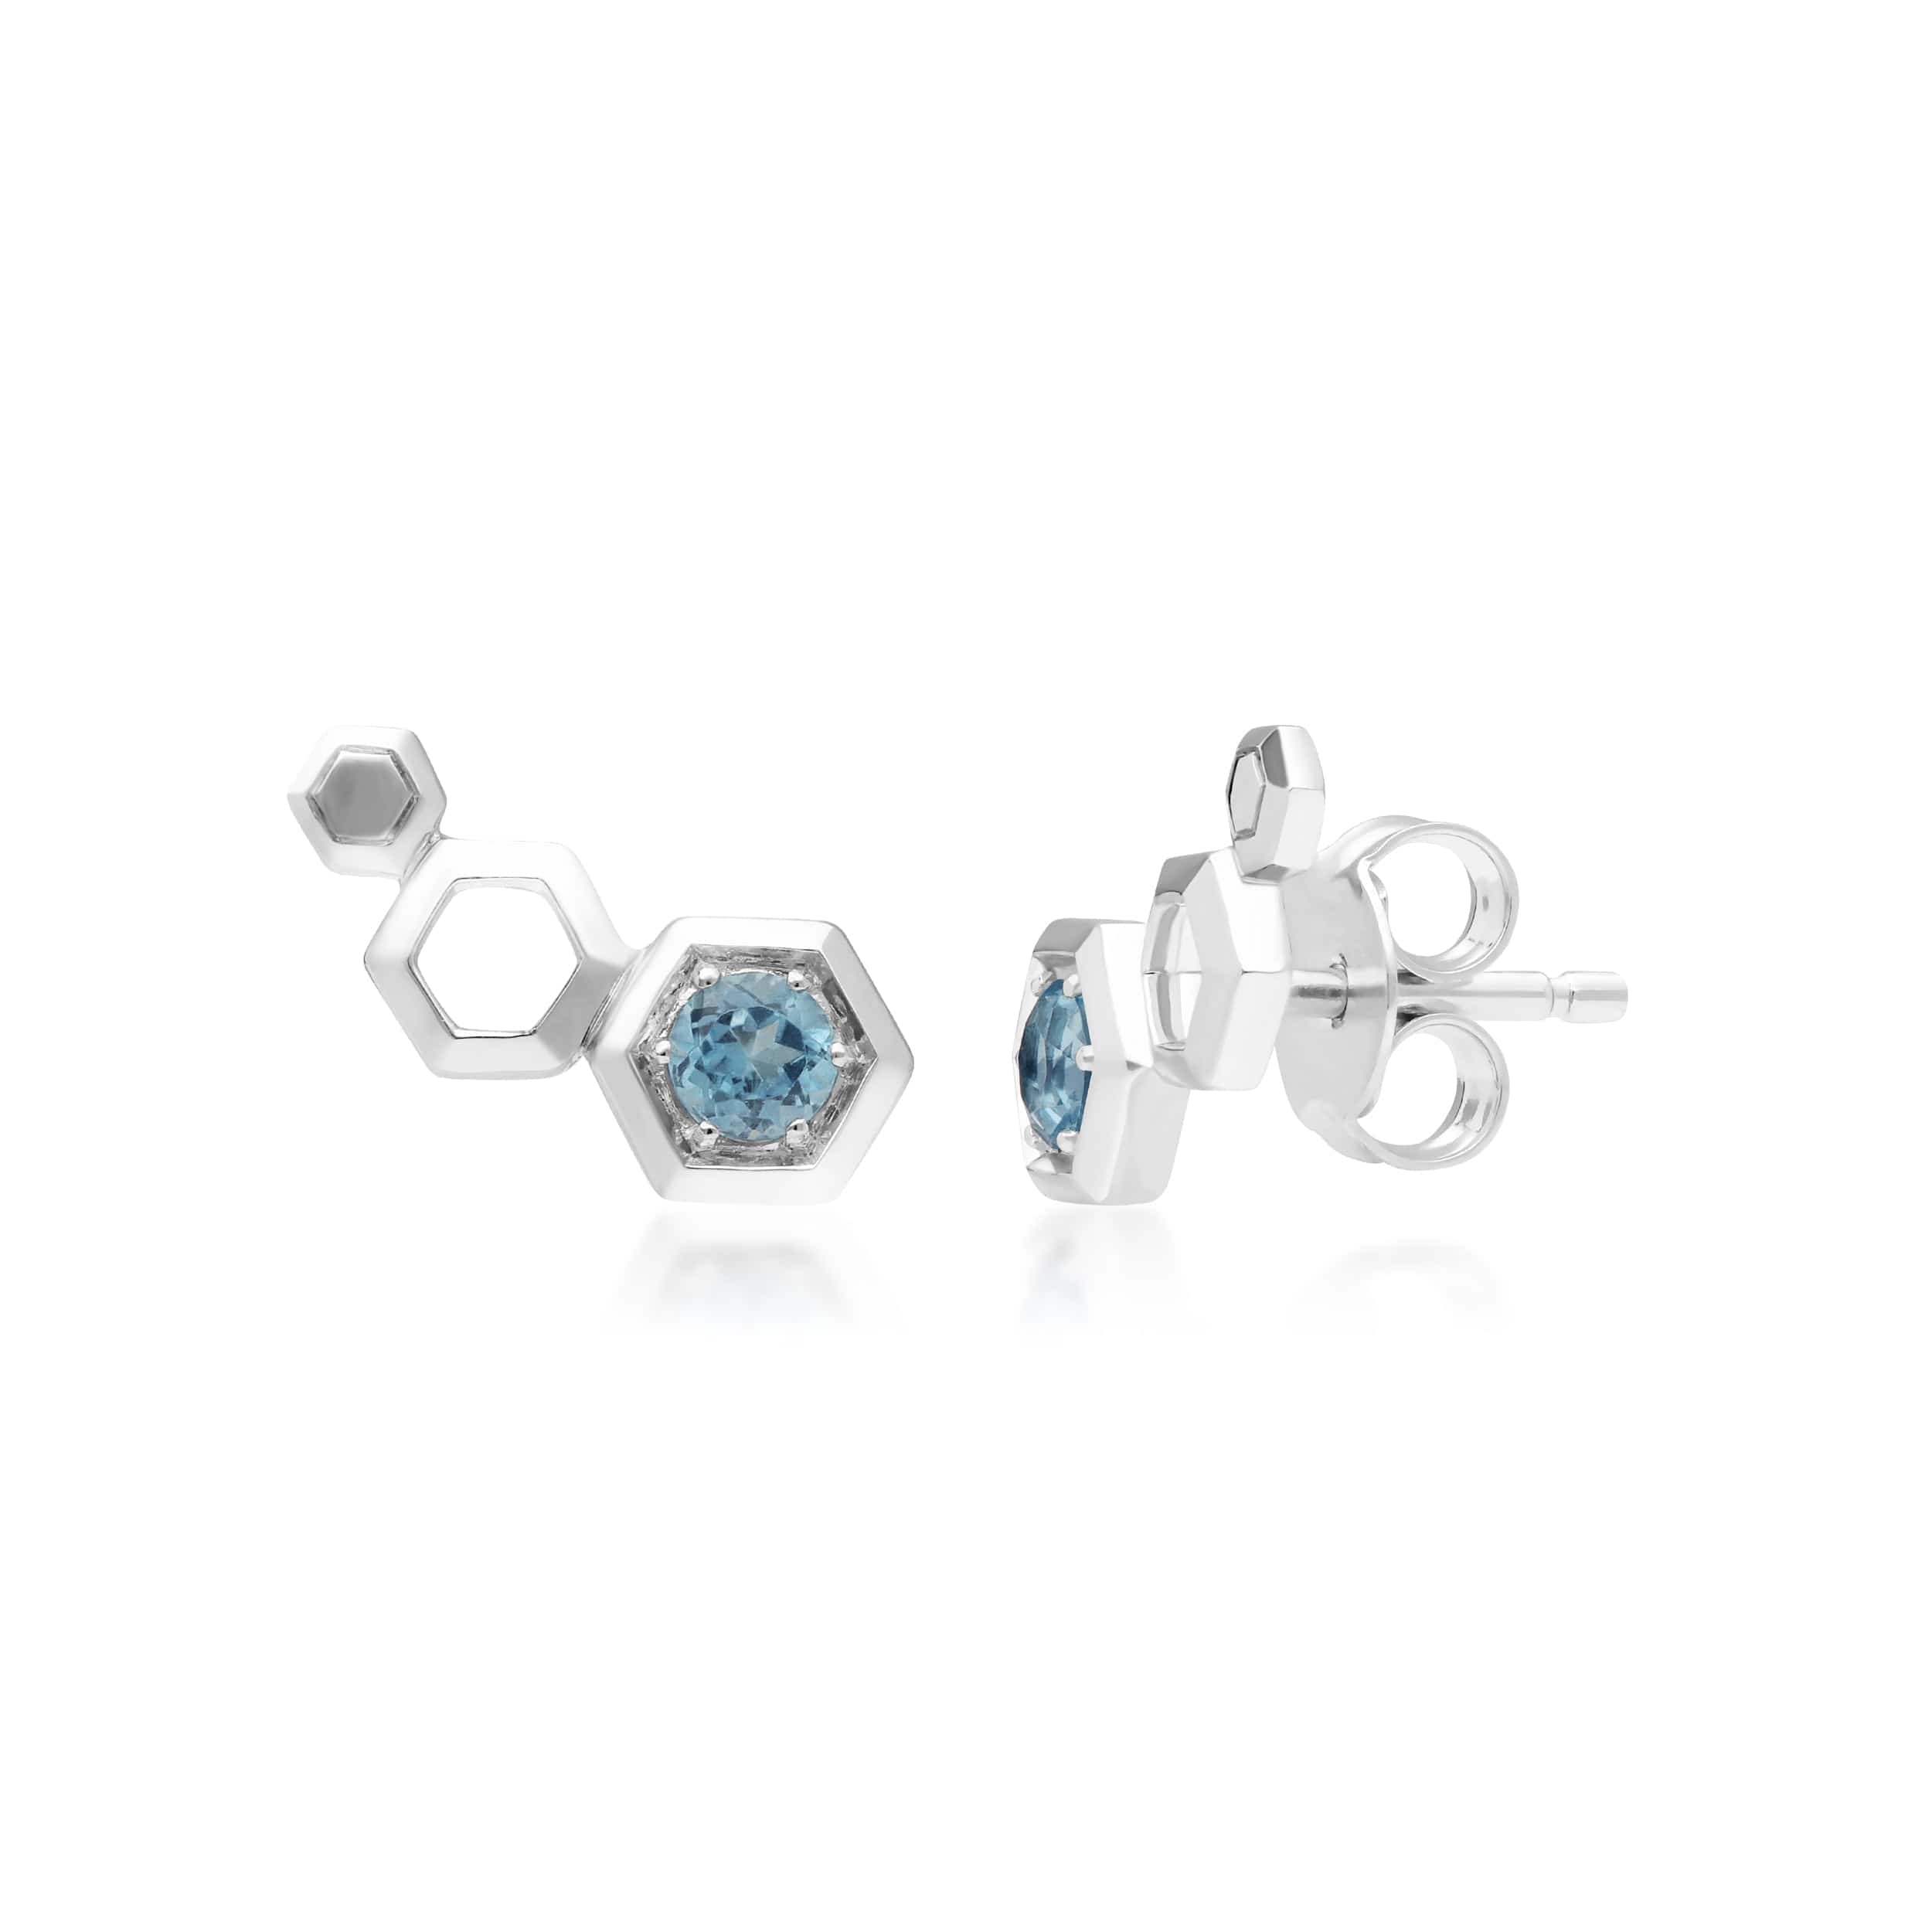 270E026701925 Honeycomb Blue Topaz Ear Climber Studs in 925 Sterling Silver 1